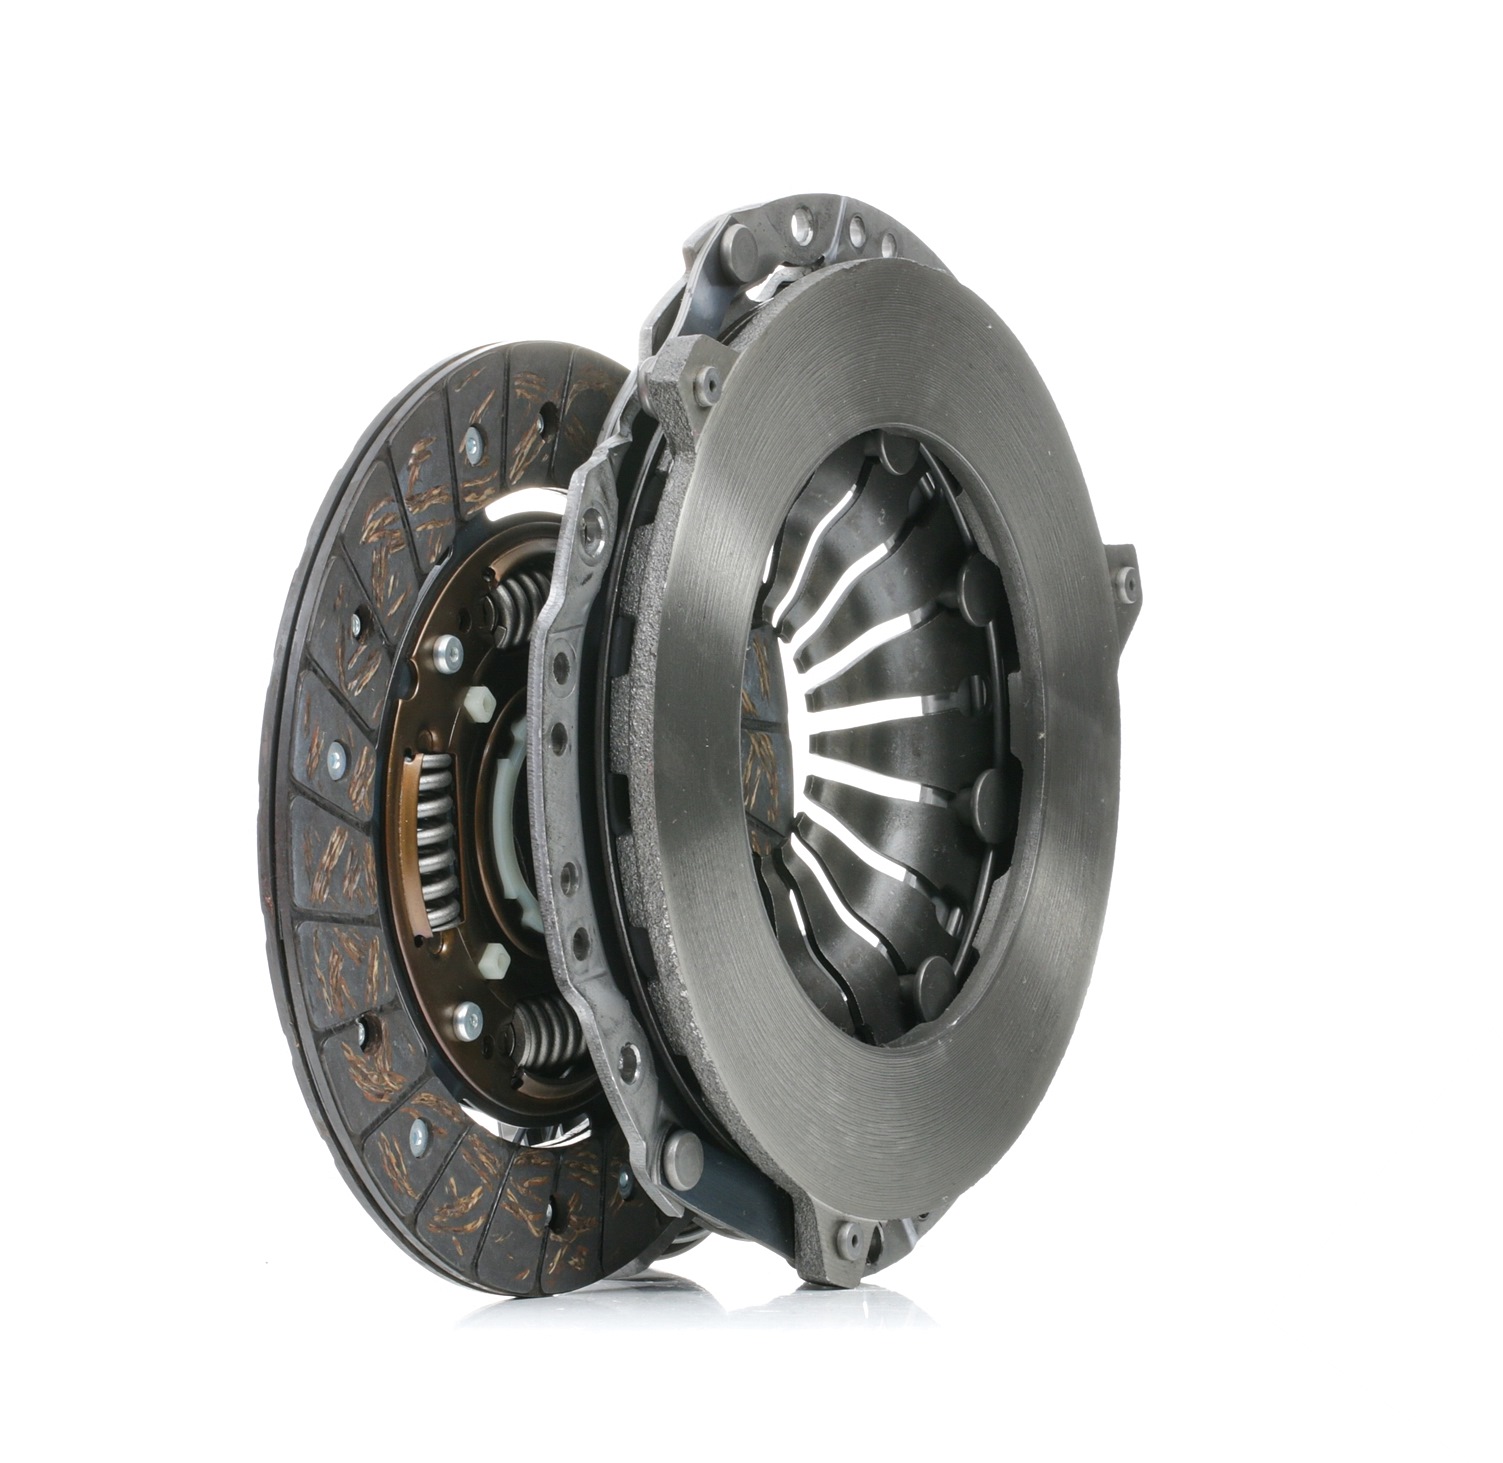 STARK SKCK-0101004 Clutch kit with clutch pressure plate, with central slave cylinder, with clutch disc, 200mm